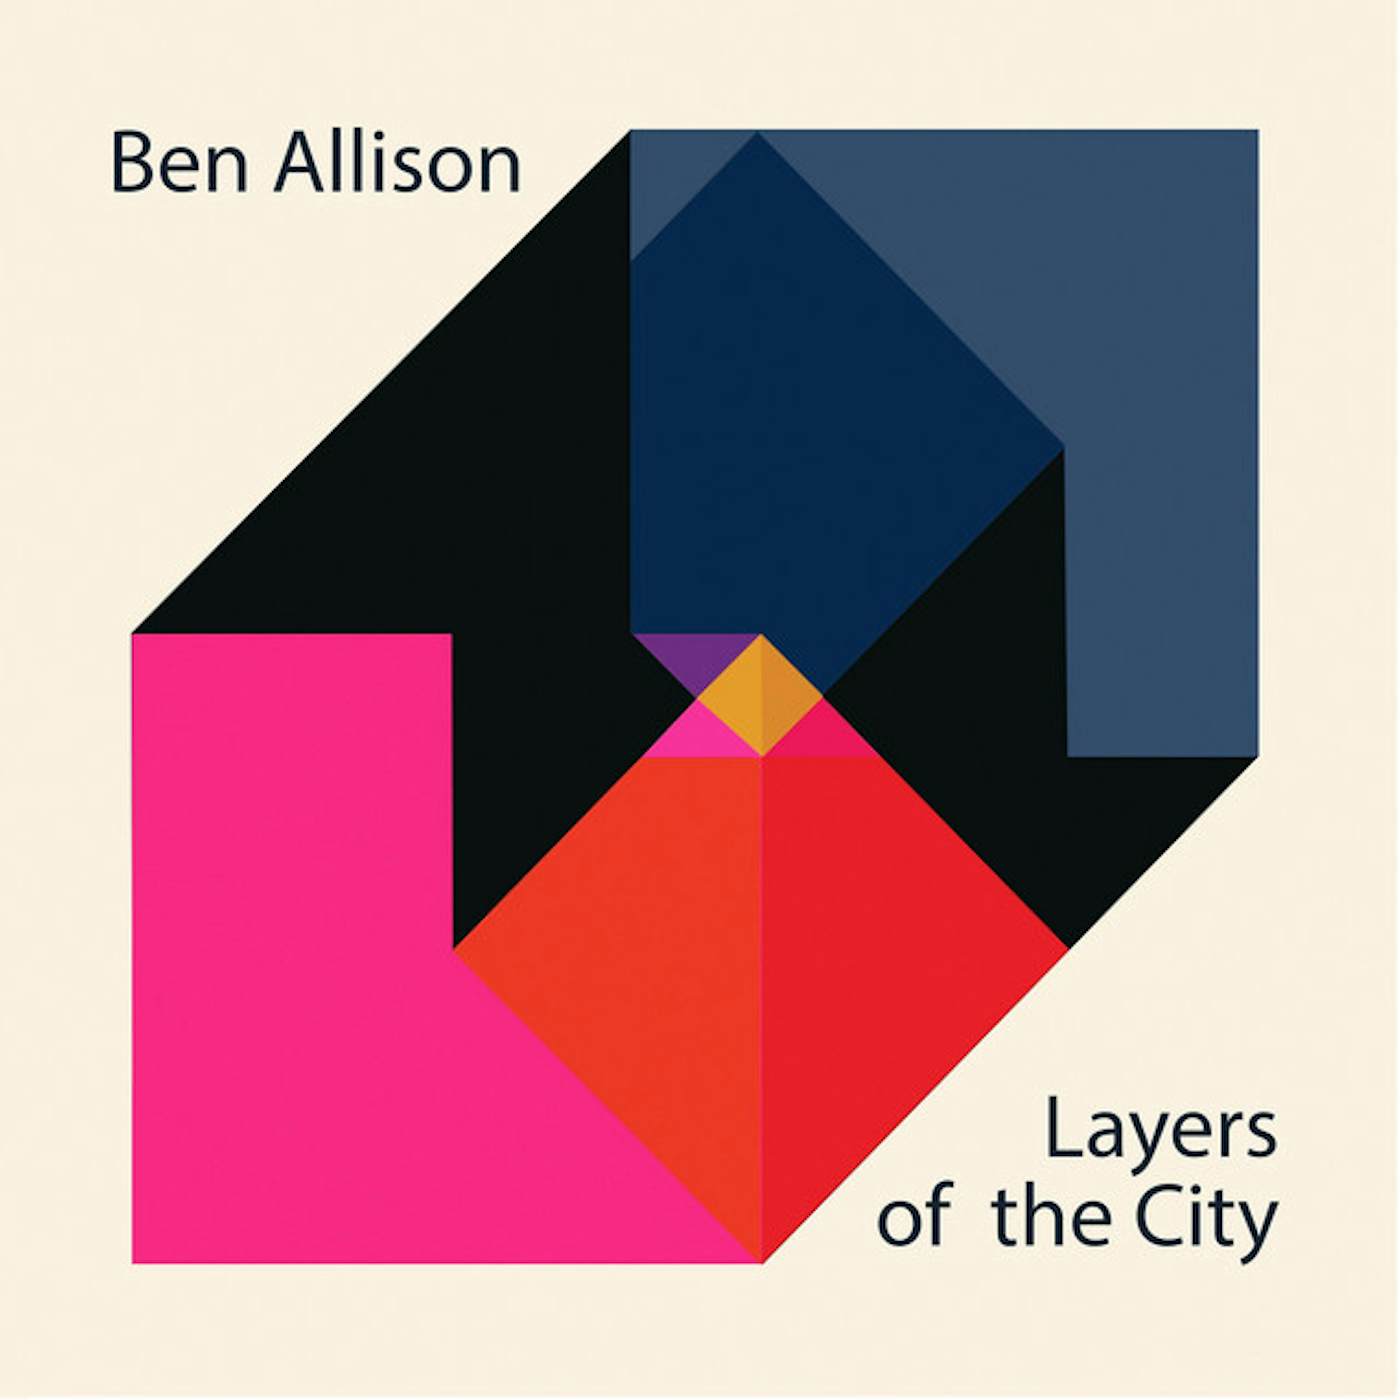 Ben Allison LAYERS OF THE CITY CD